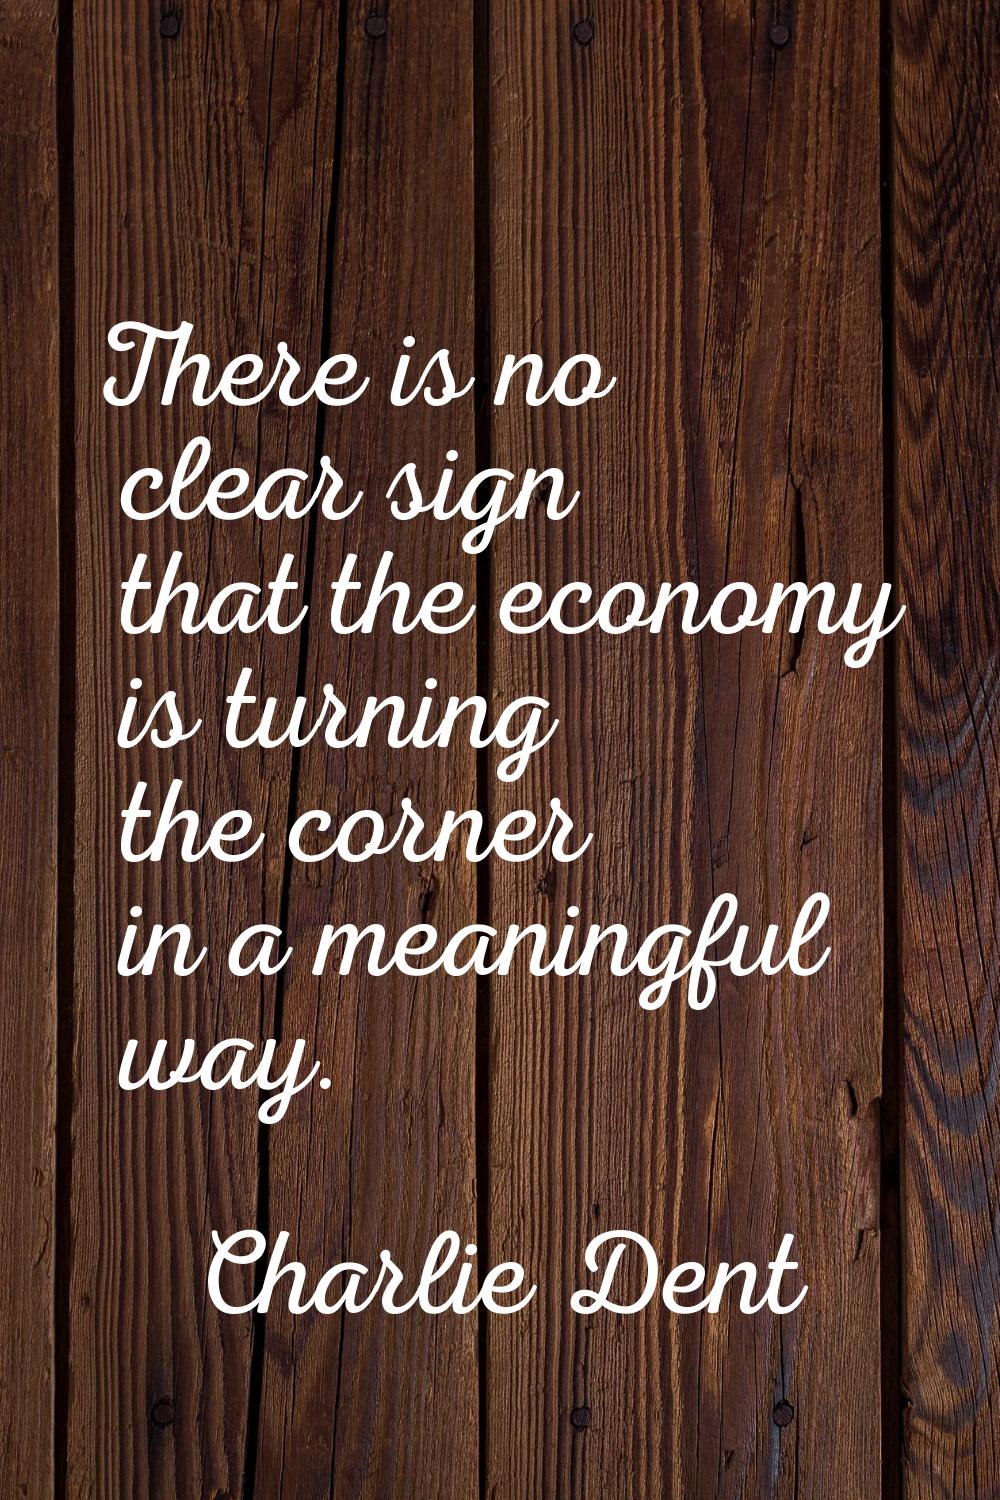 There is no clear sign that the economy is turning the corner in a meaningful way.